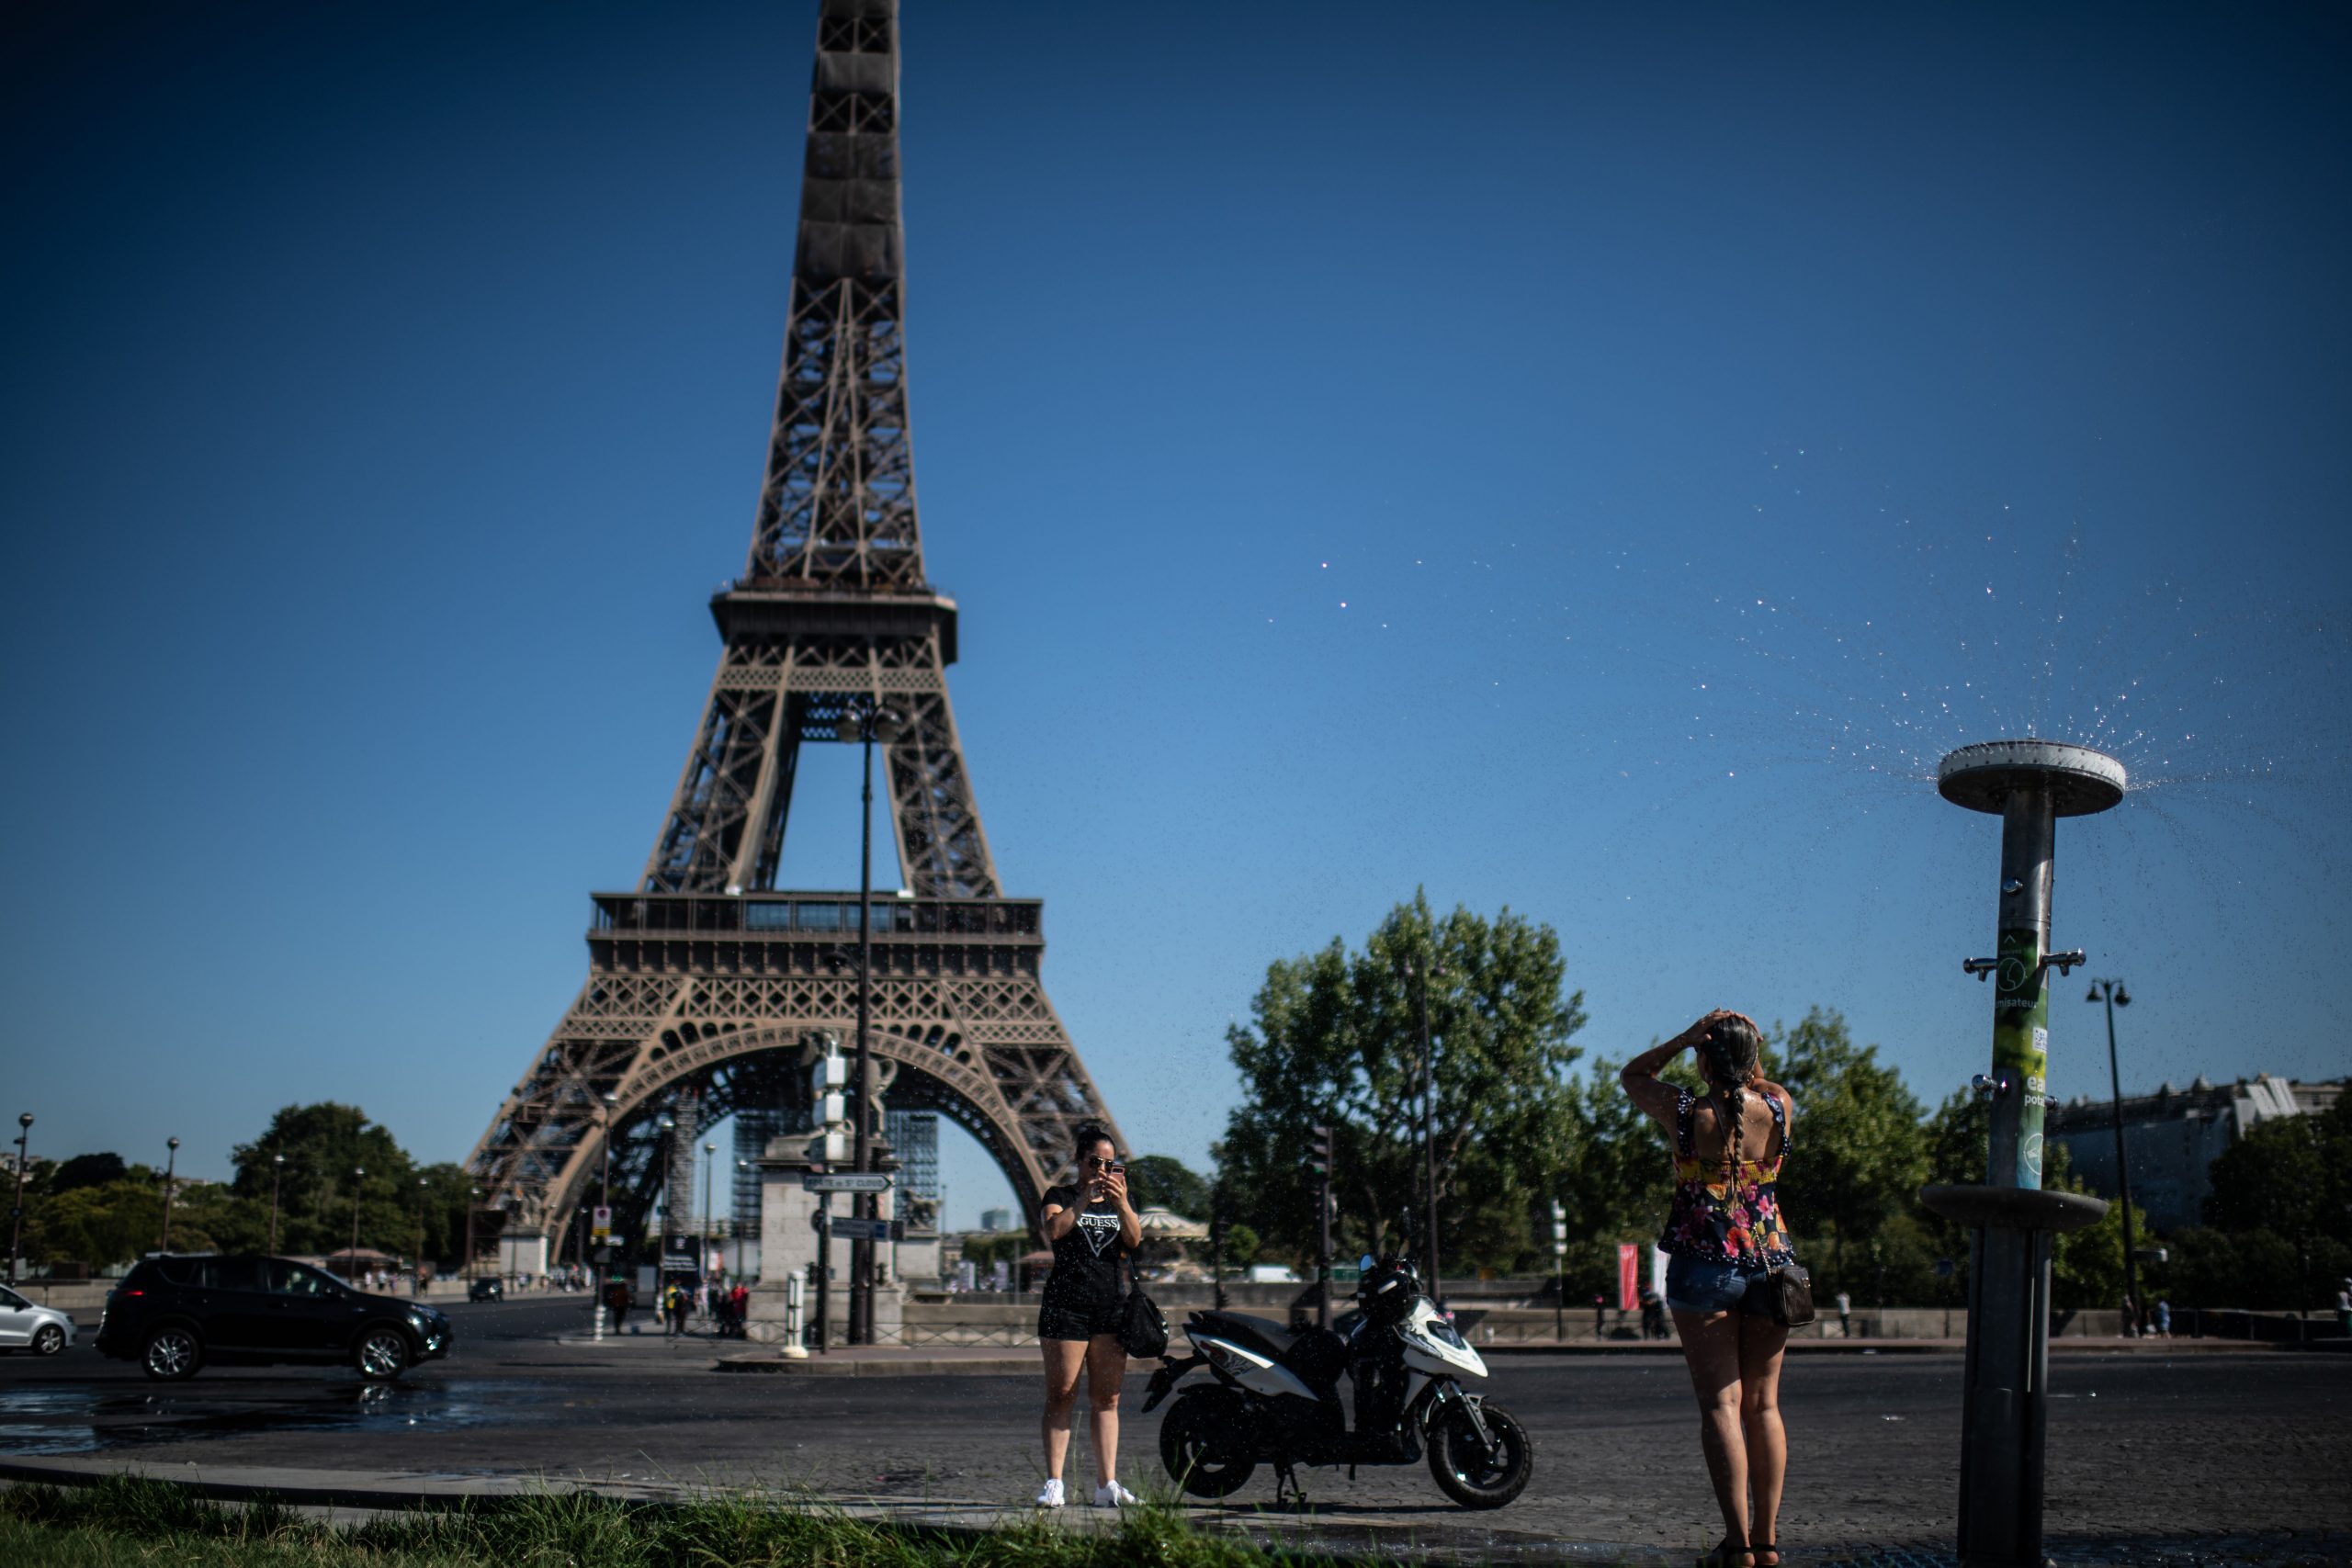 Bomb scare: Eiffel Tower reopens as police find no explosives on site